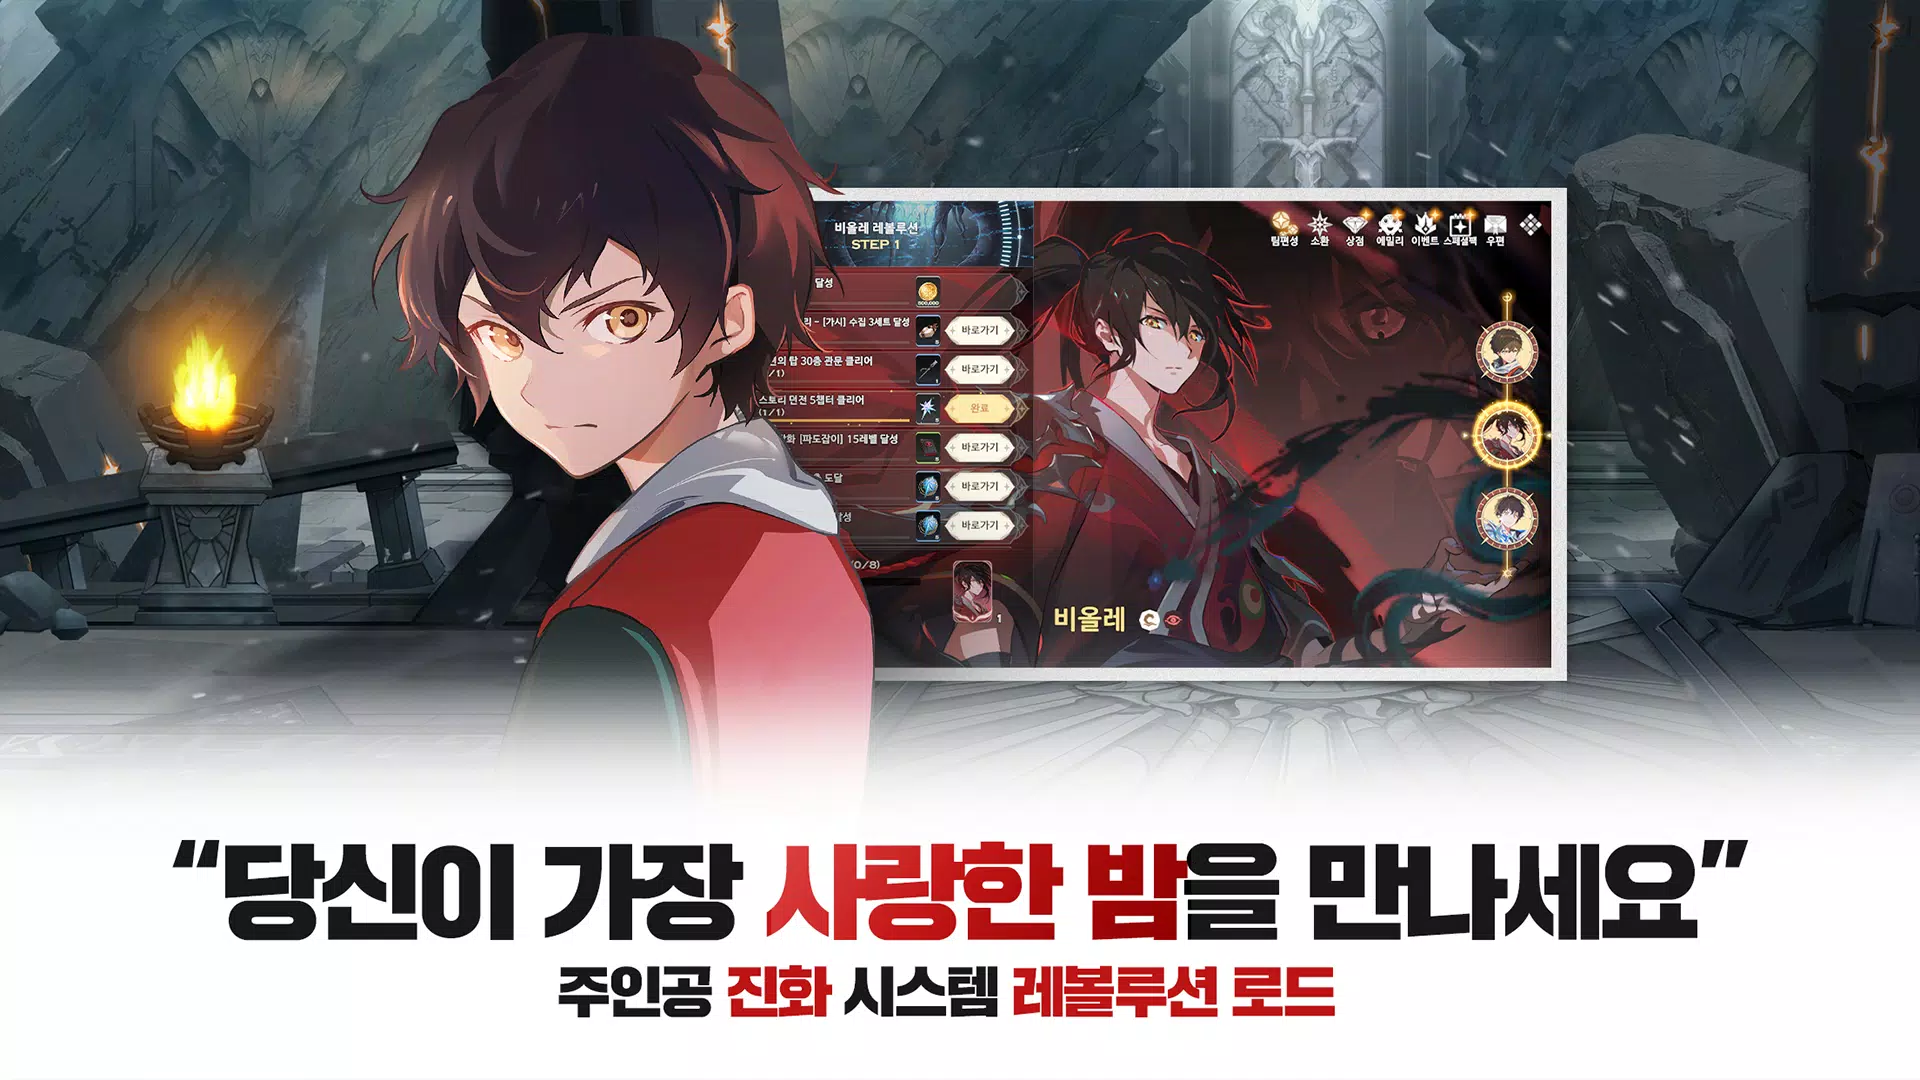 Tower of God (KR) for Android - Download the APK from Uptodown